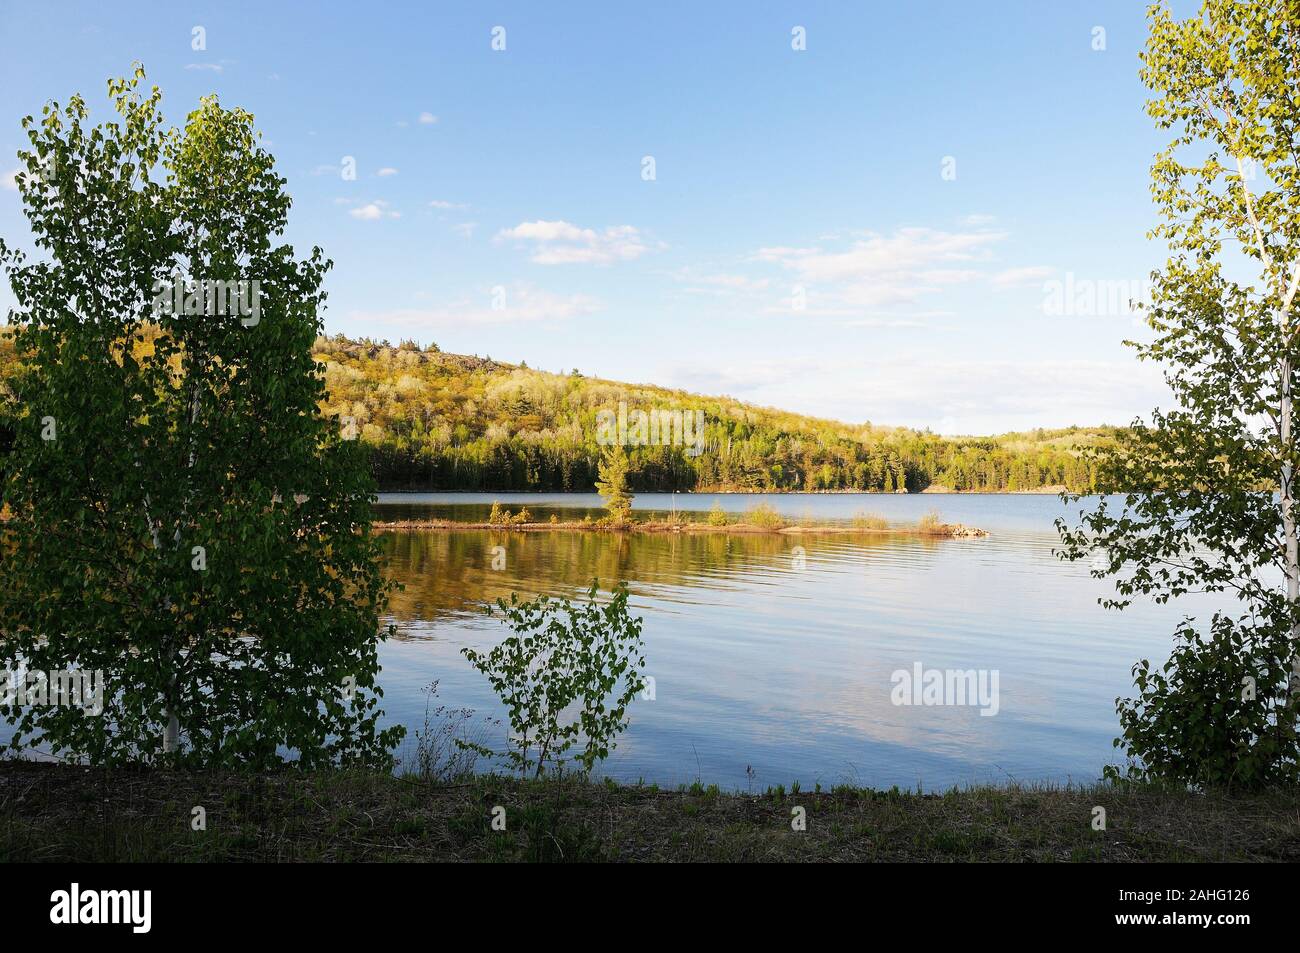 Beautiful scenery landscape of summer season showing bleu sky, buffy clouds, water, trees with a tranquility feeling. Stock Photo